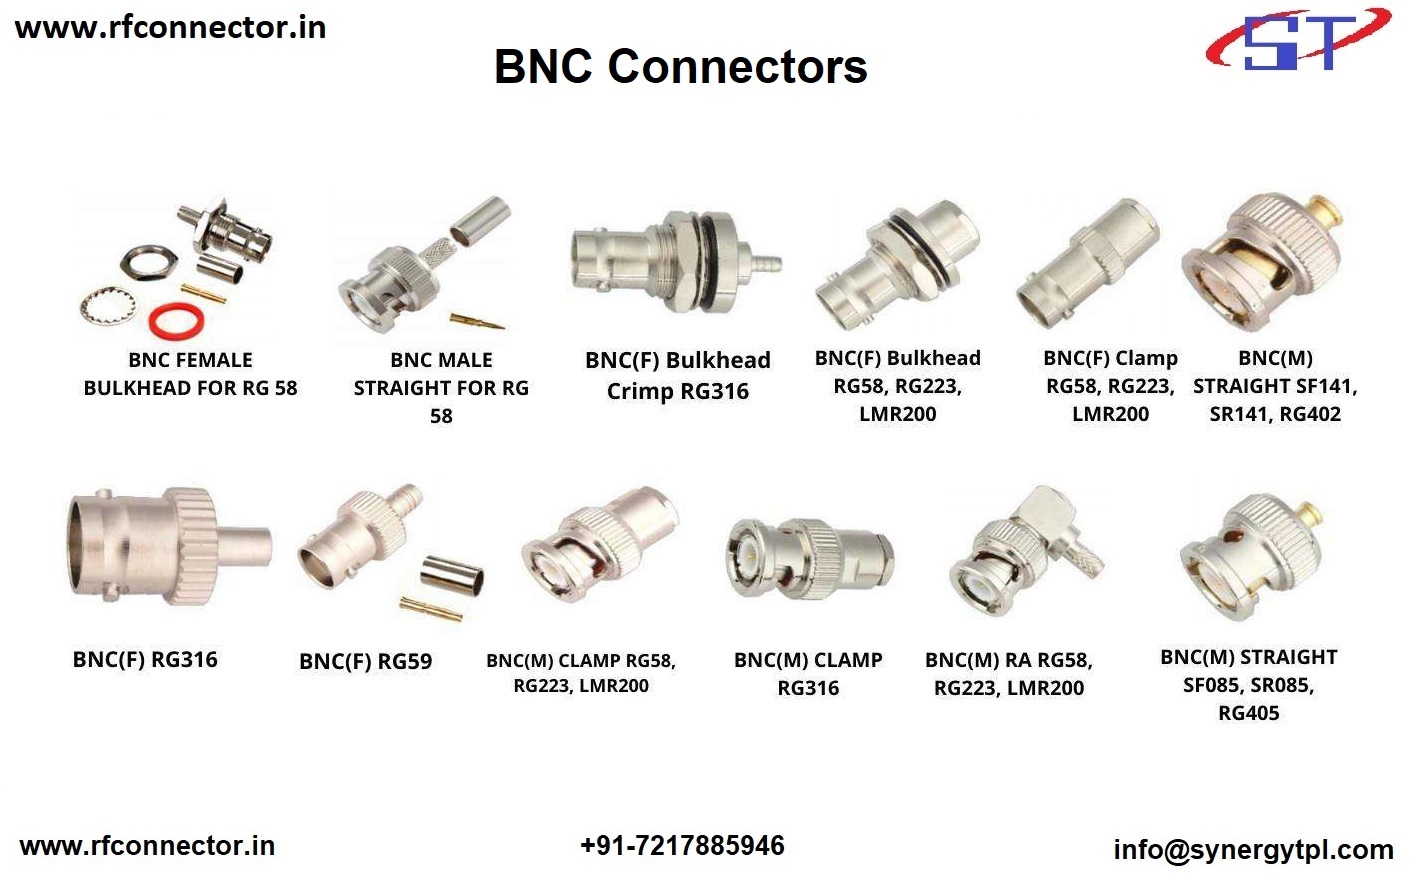 DIN male right angle crimp connector for LMR 400 cable